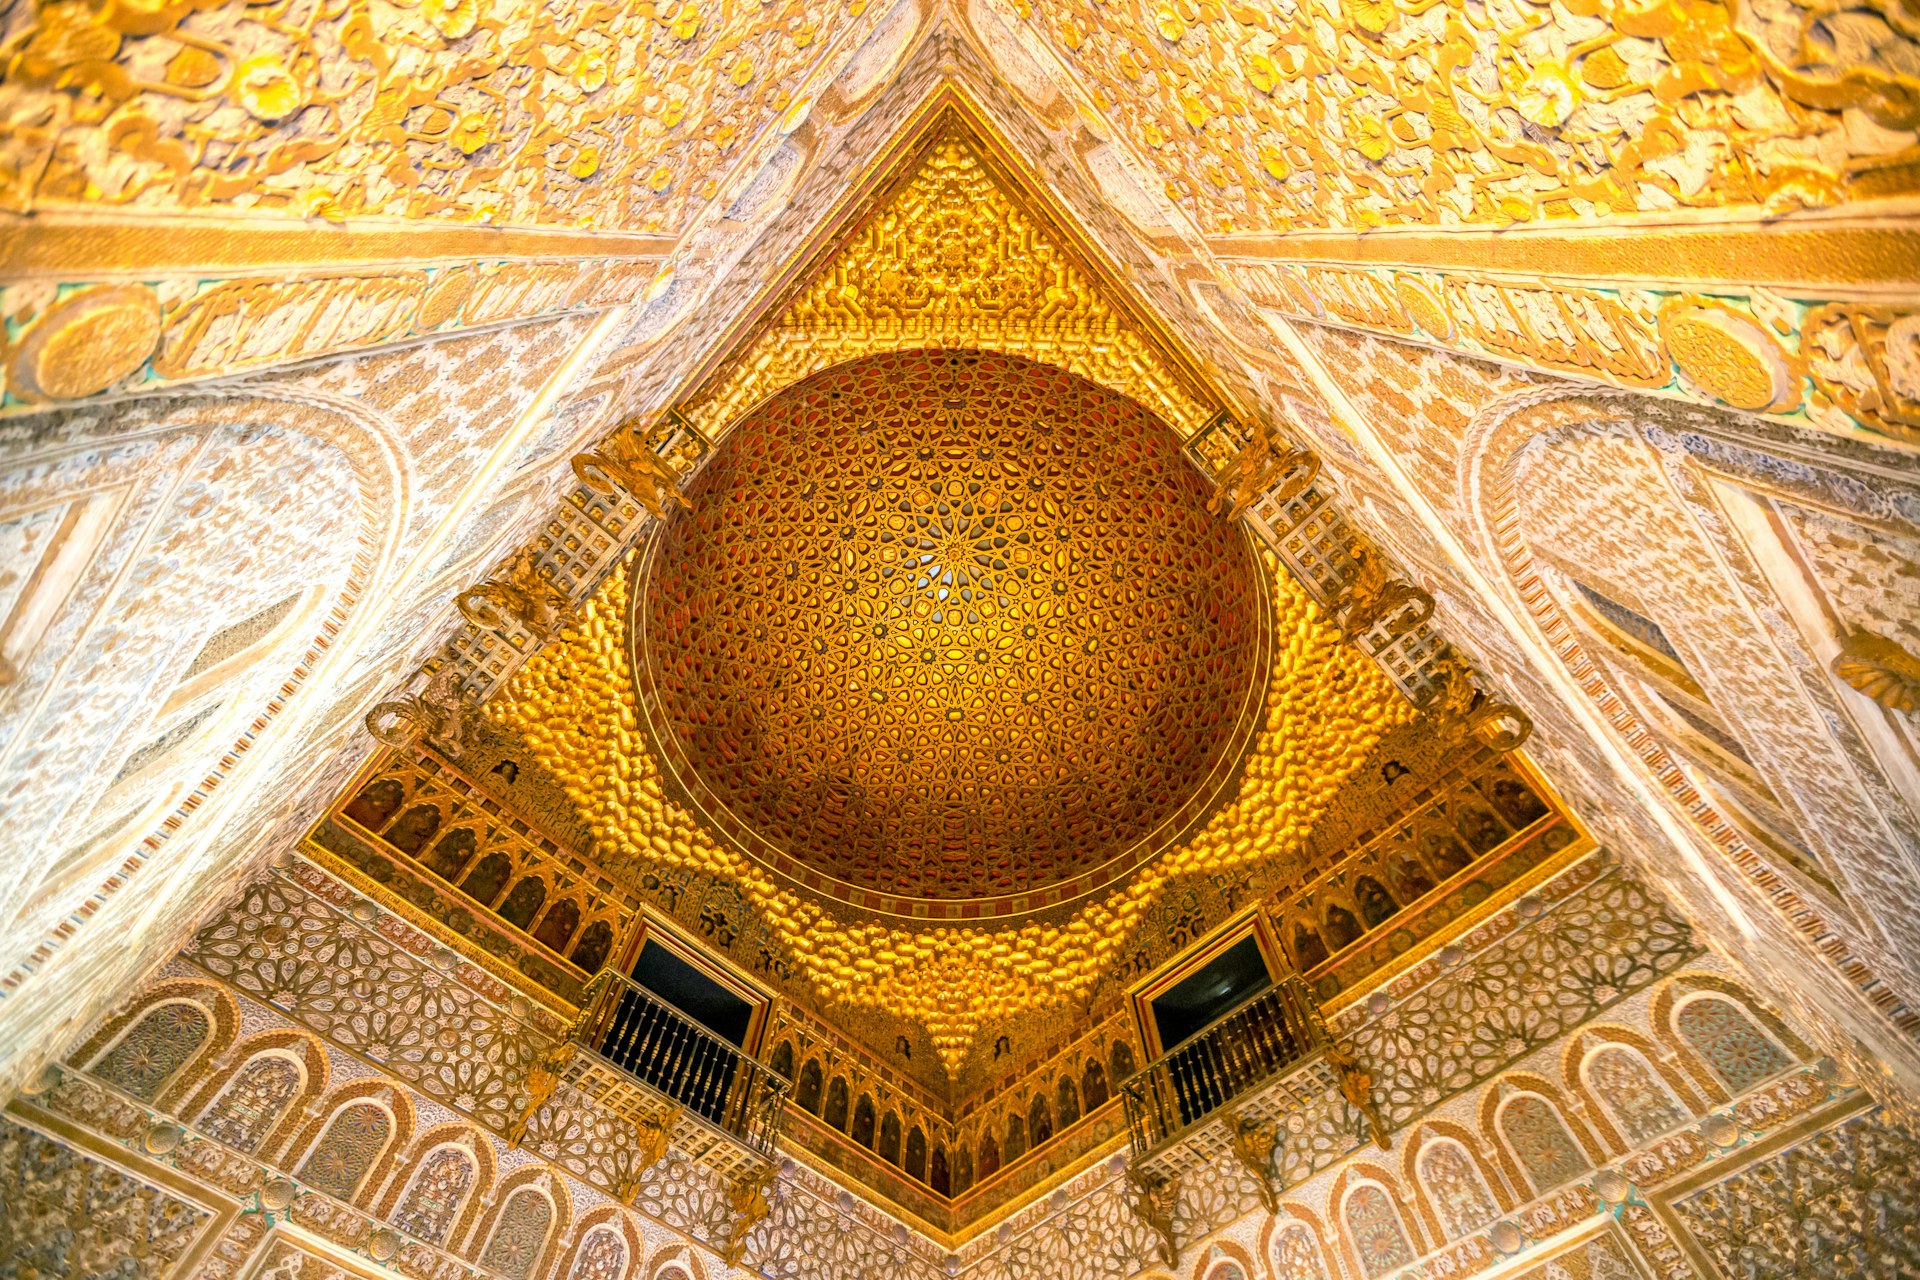 A view from below of an elaborate gold room in Seville's Real Alcázar; the walls and domed ceiling are covered in ornate tiles and mosaics.